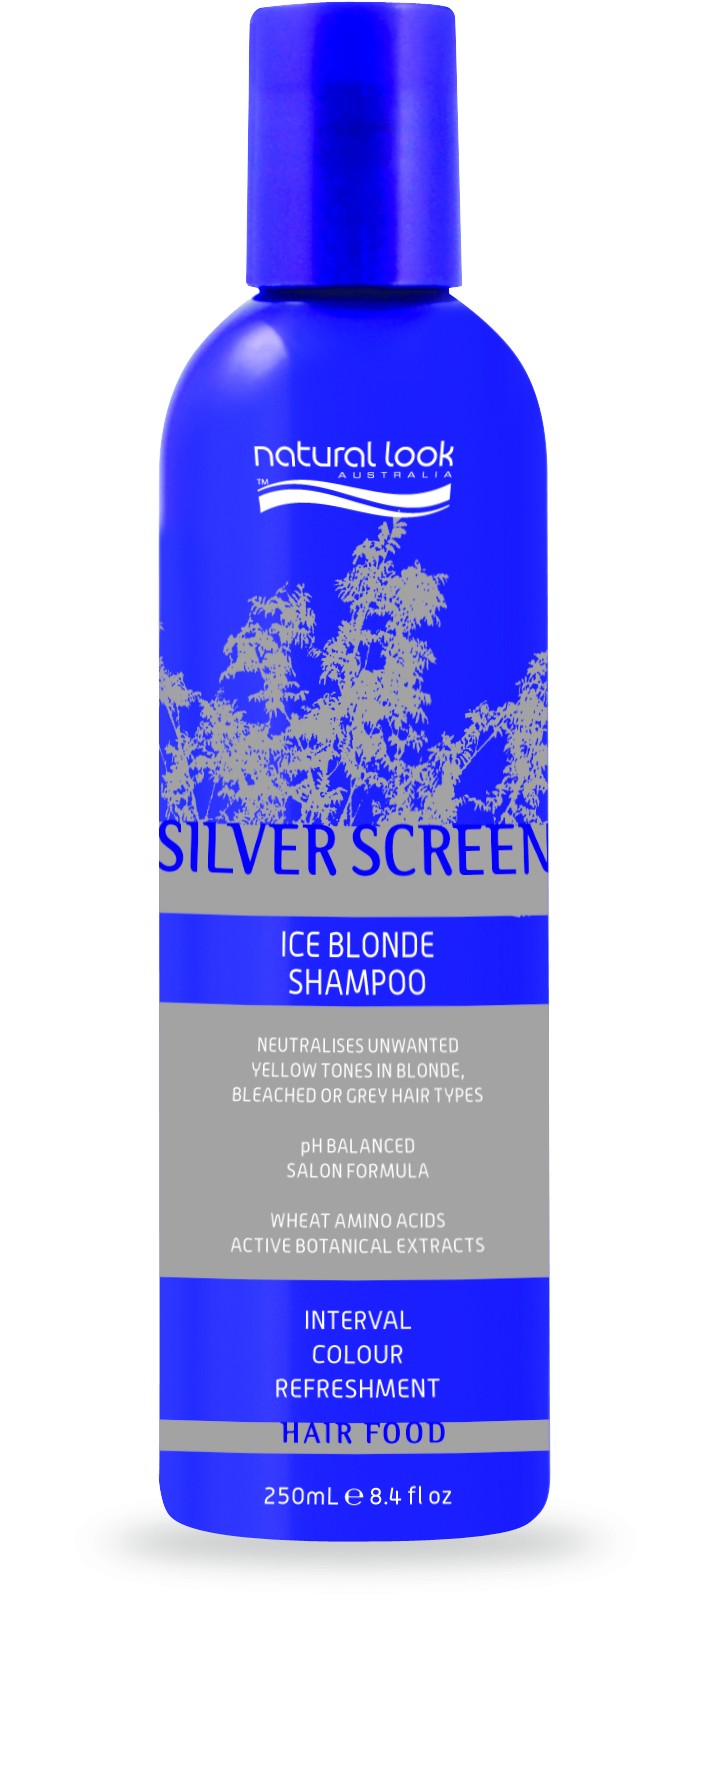 Natural Look Silver Screen Ice Blonde Shampoo 250ml